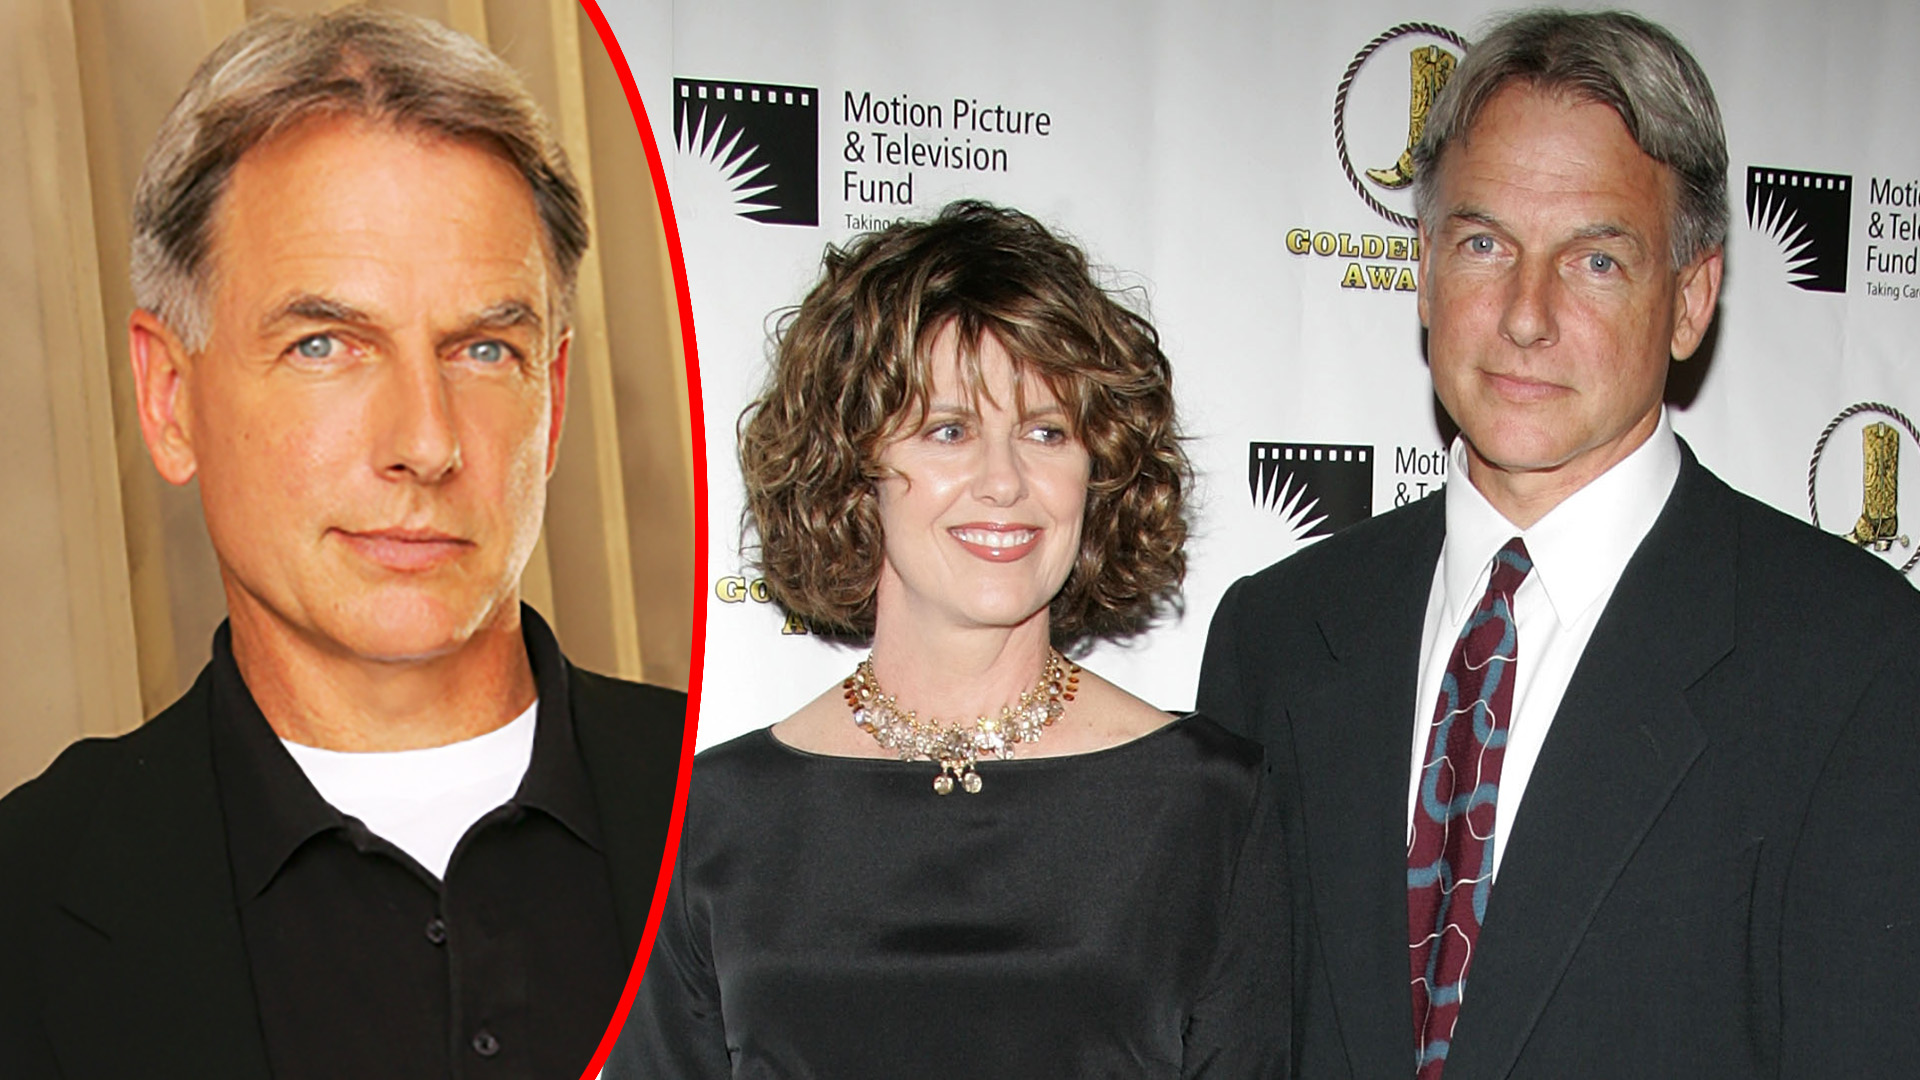 It’s true that opposites attract? – Mark Harmon Talks About Differences ...